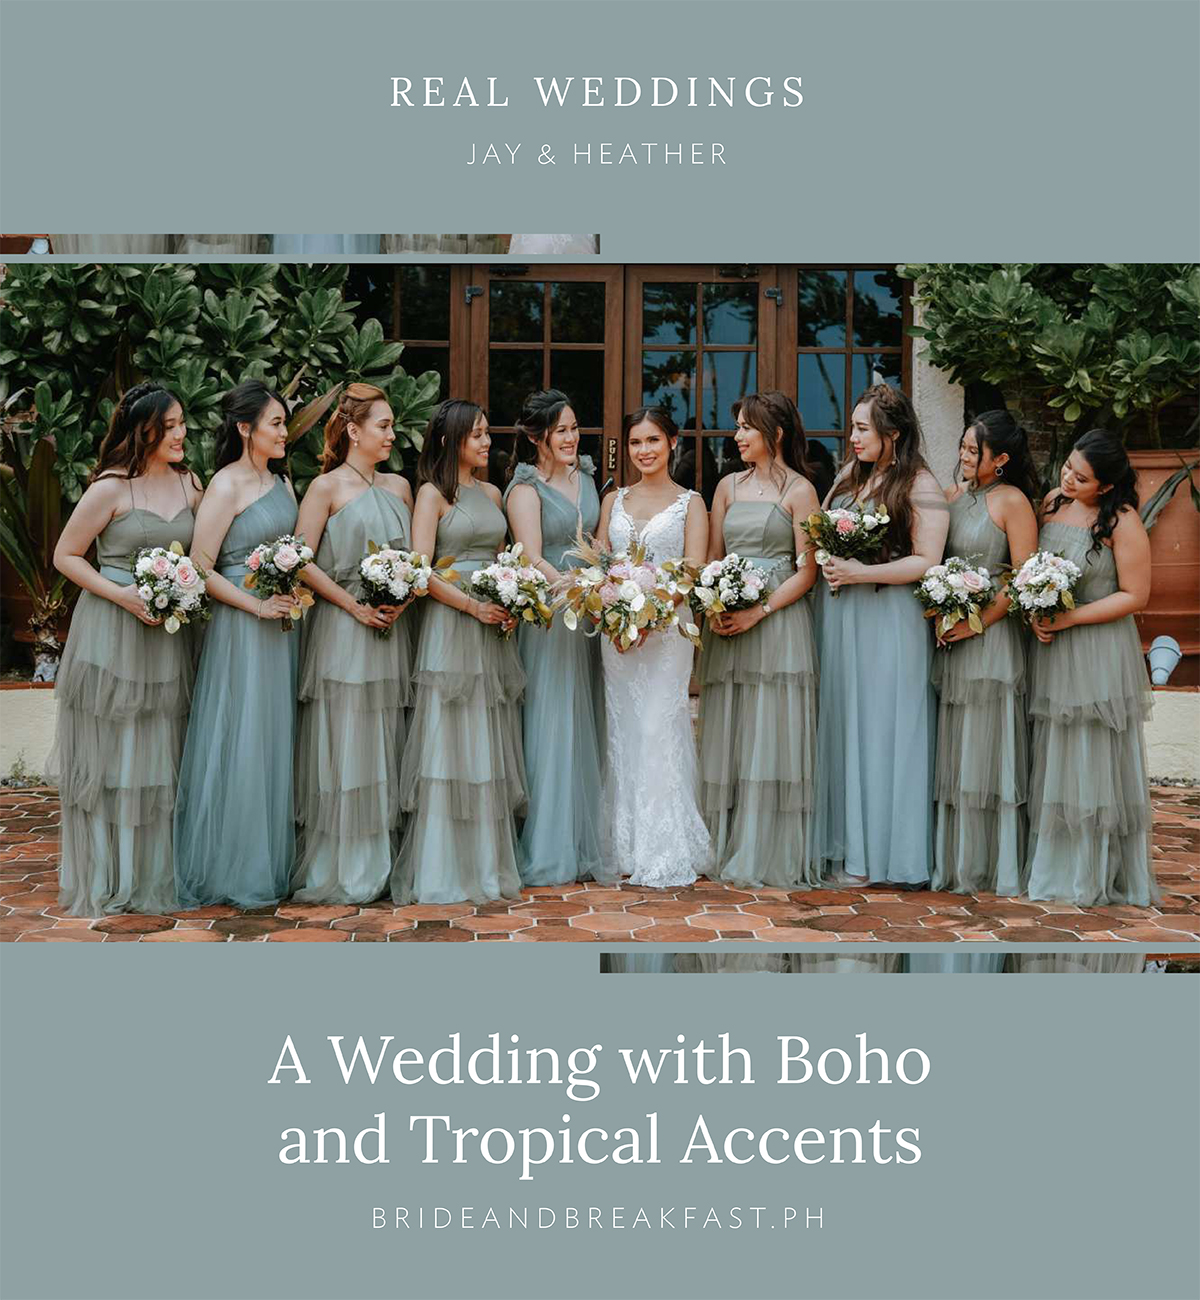 Real Weddings: Jay and Heather. A Wedding with Boho and Tropical Accents